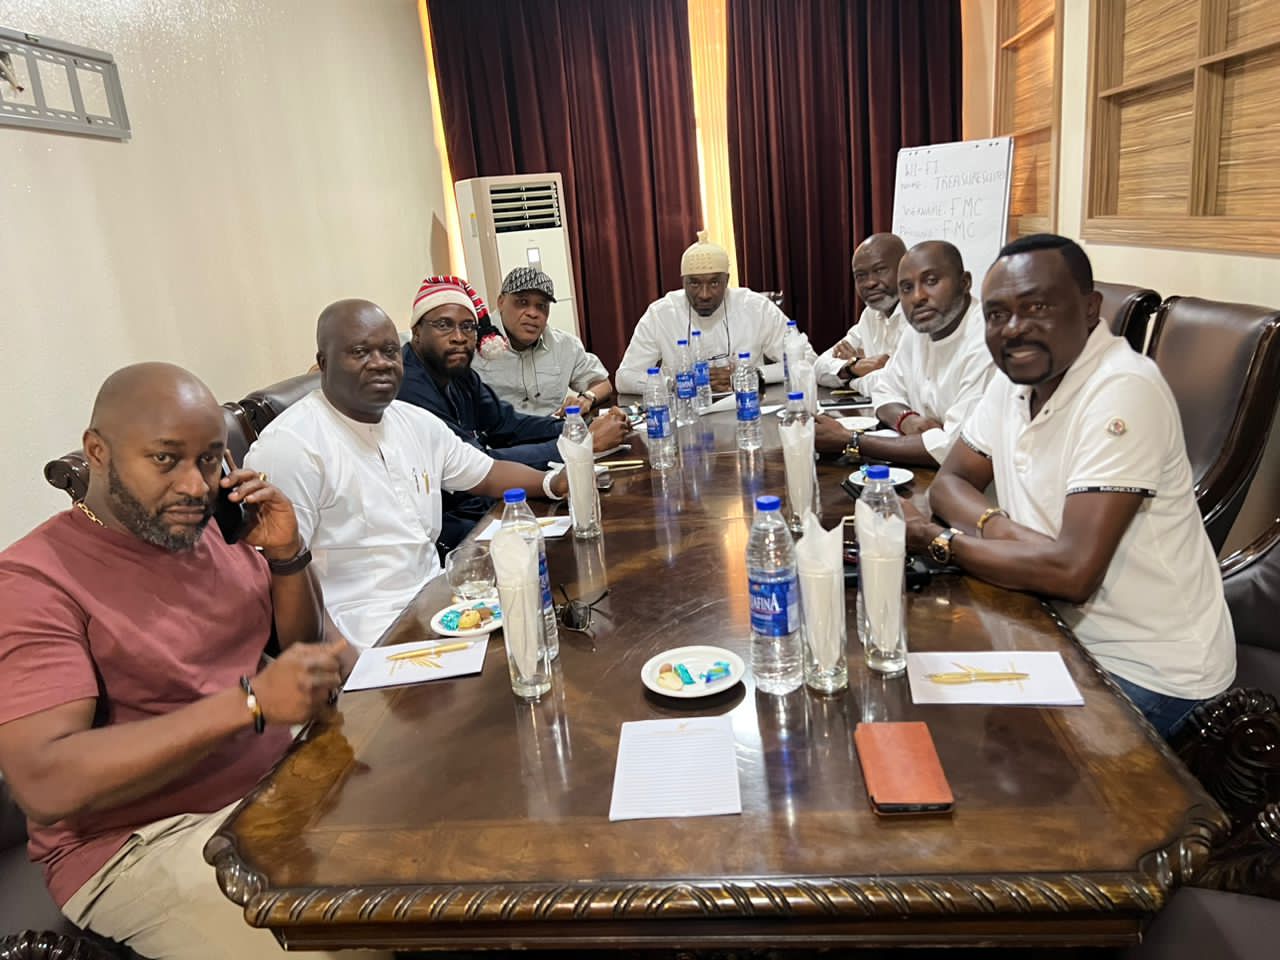 From (L): High Chief Obi Aguocha; Rt. Hon. Benjamin Kalu; Hon. Ginger Onwusibe, Chief Amobi Ogah and other members of Abia State House of Representatives Caucus.